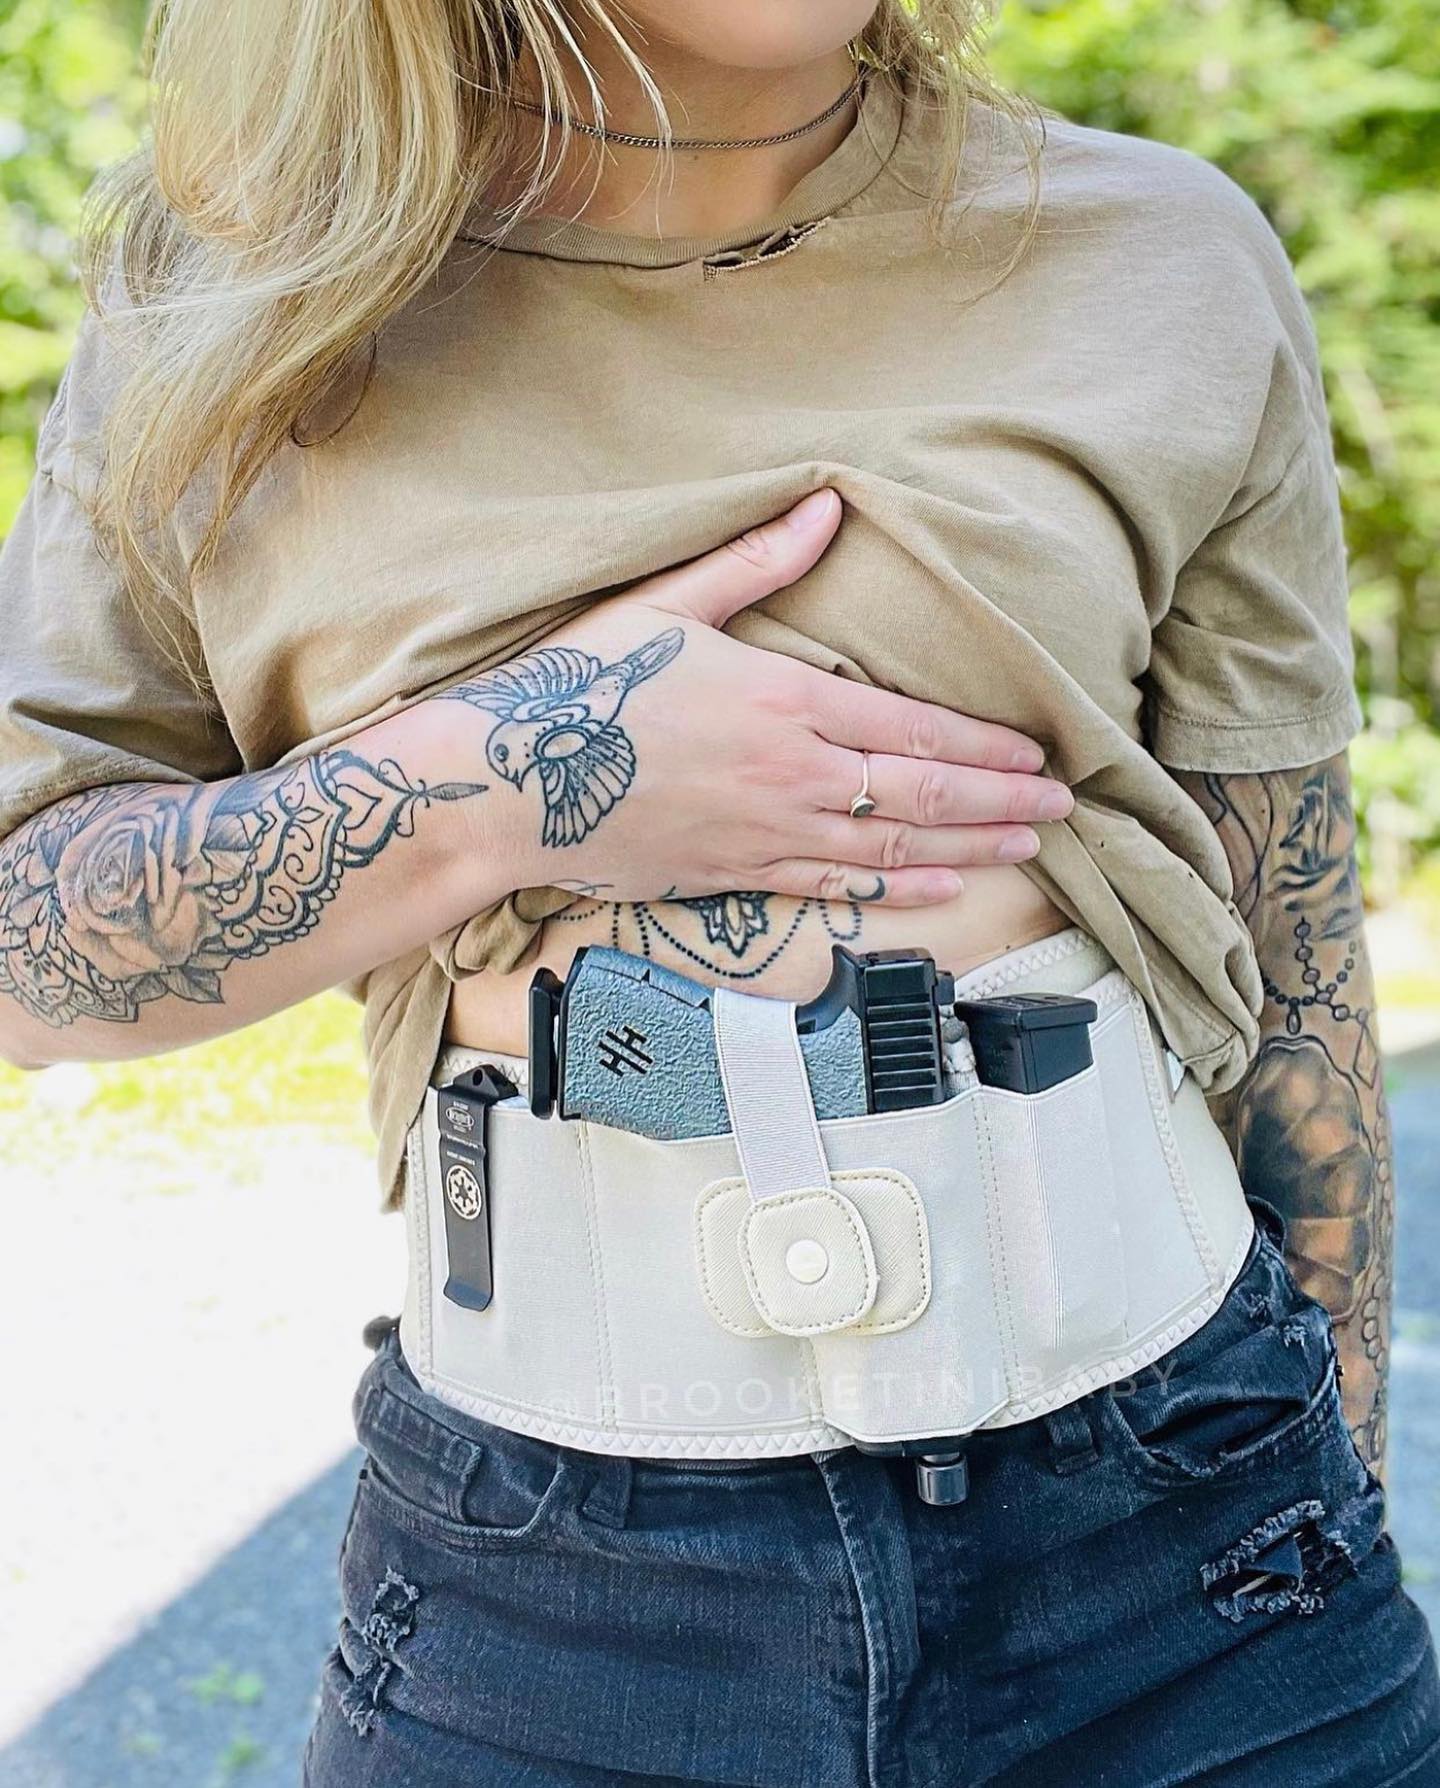 Concealed Carry Holsters  Holster Concealed Carry Women – Lady